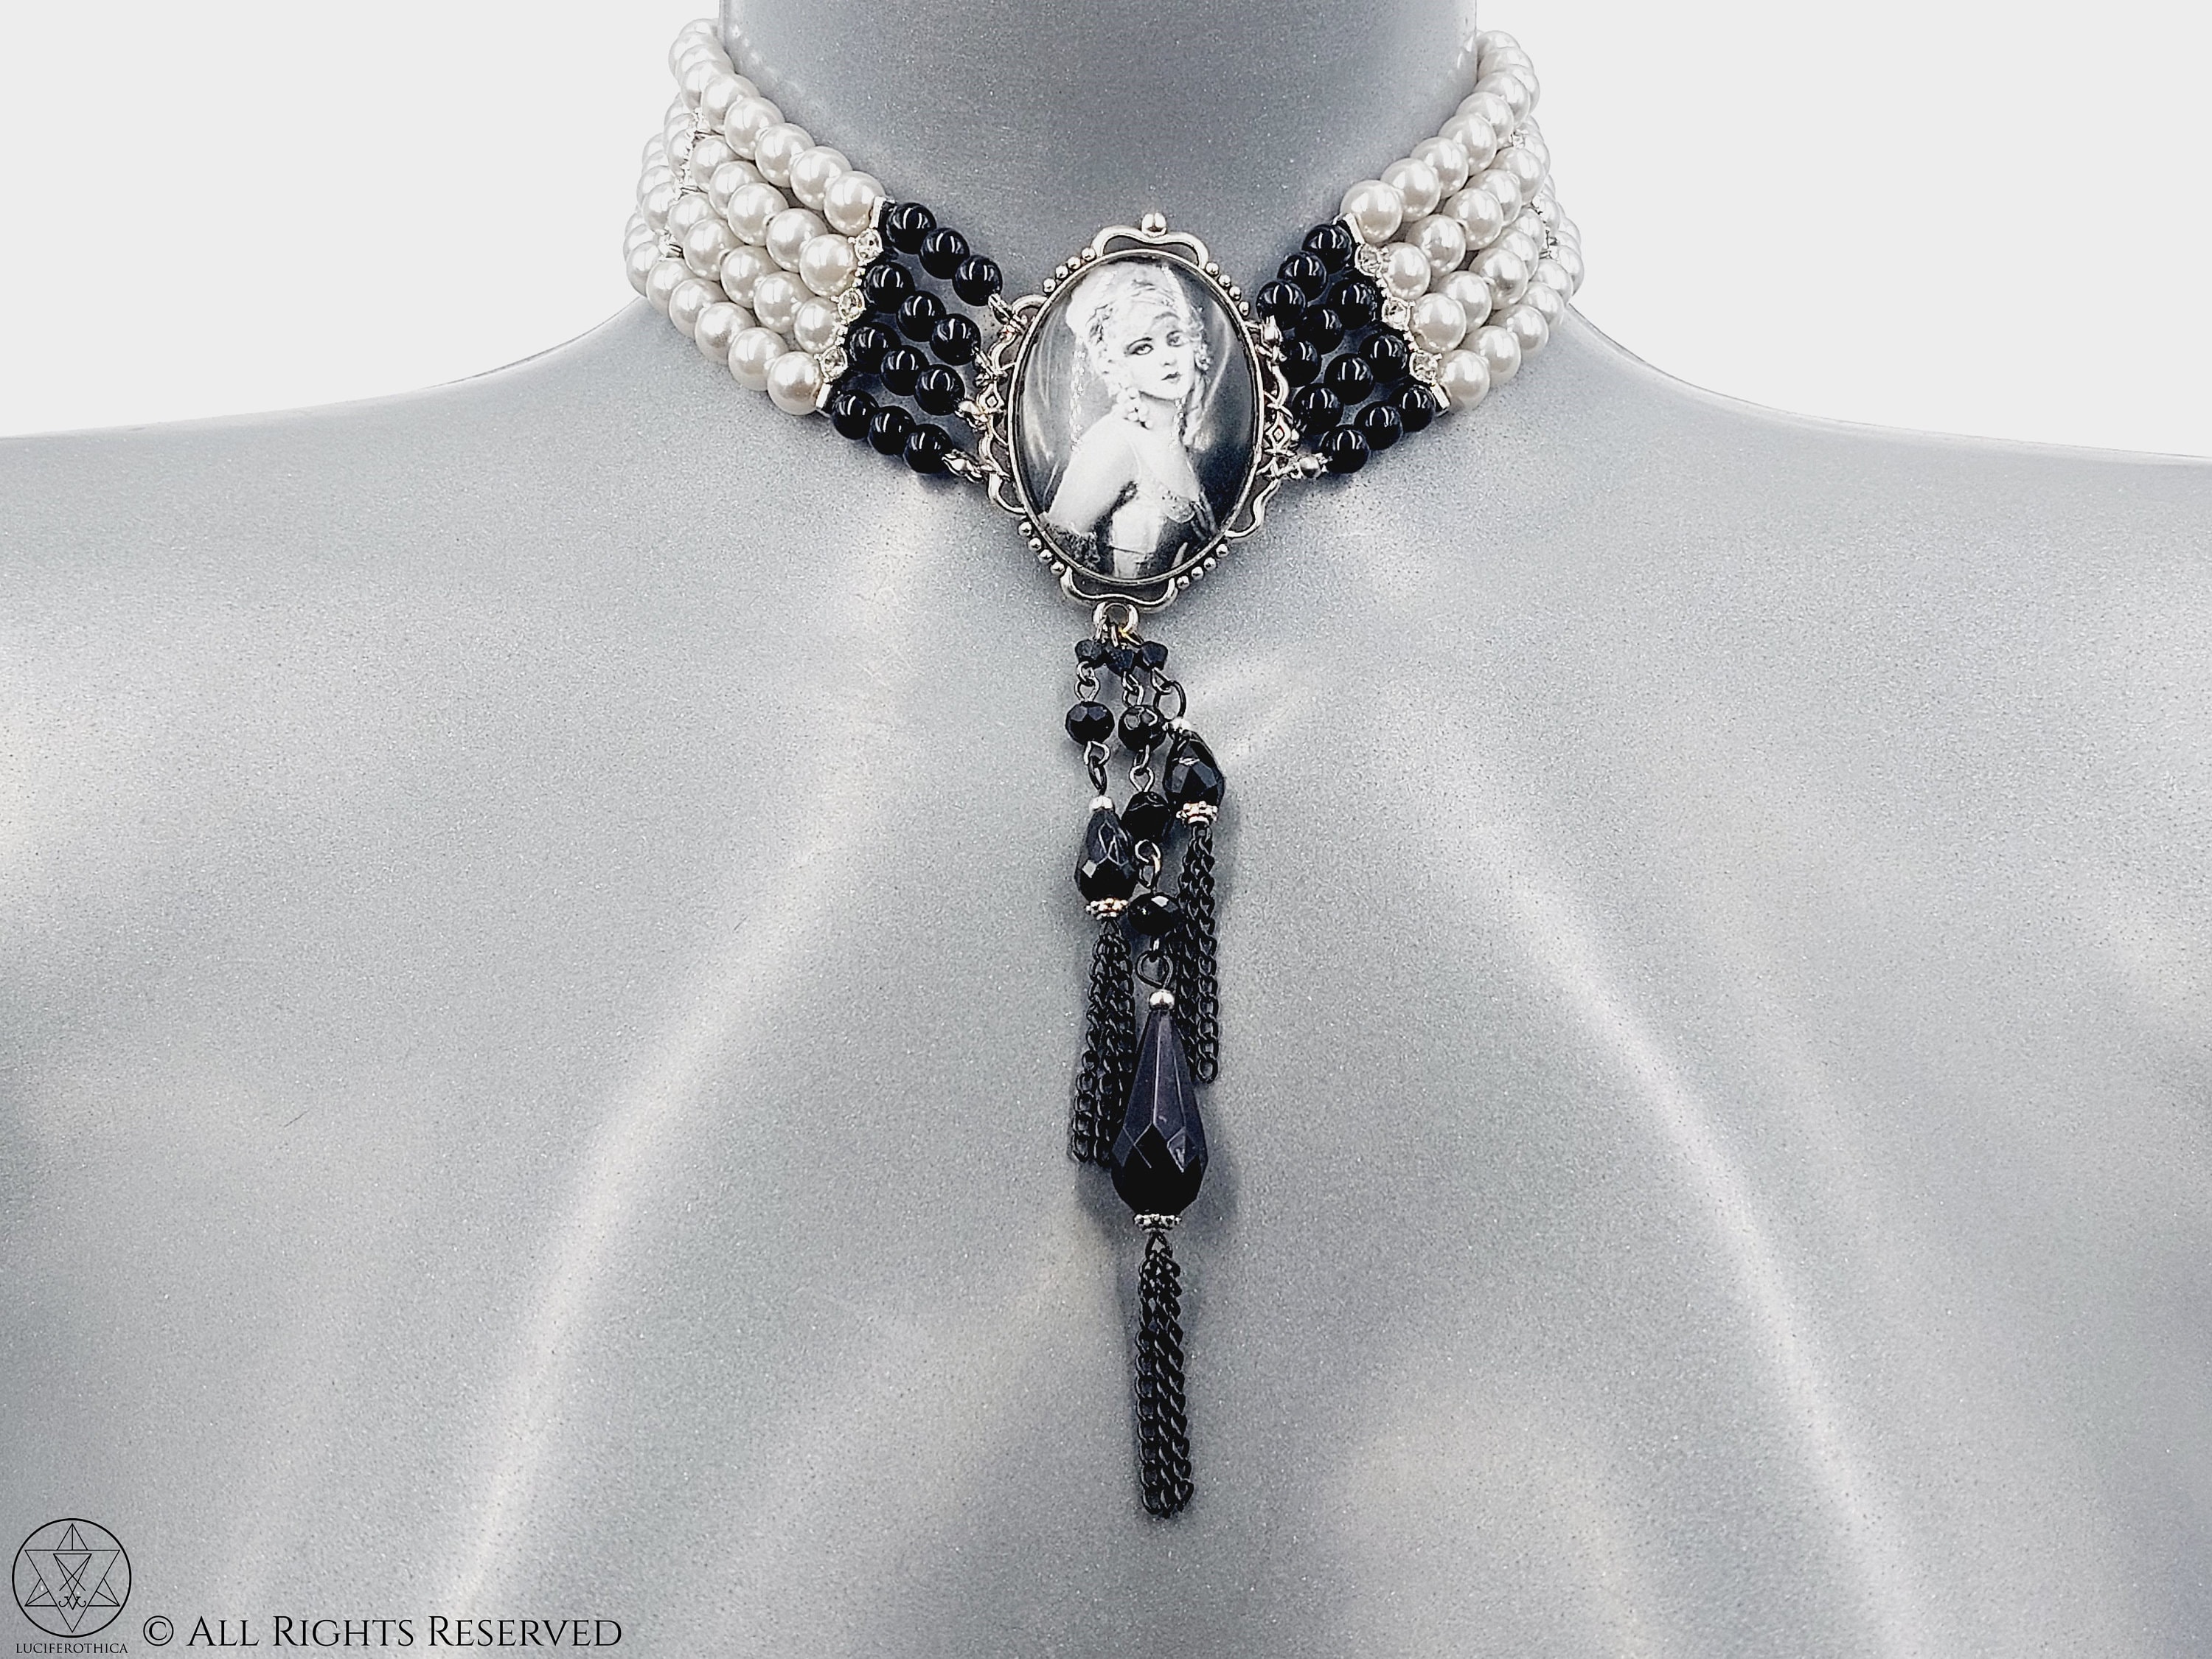 Gothic Choker With Chains, Crocheted Choker With Chains, Obsidian